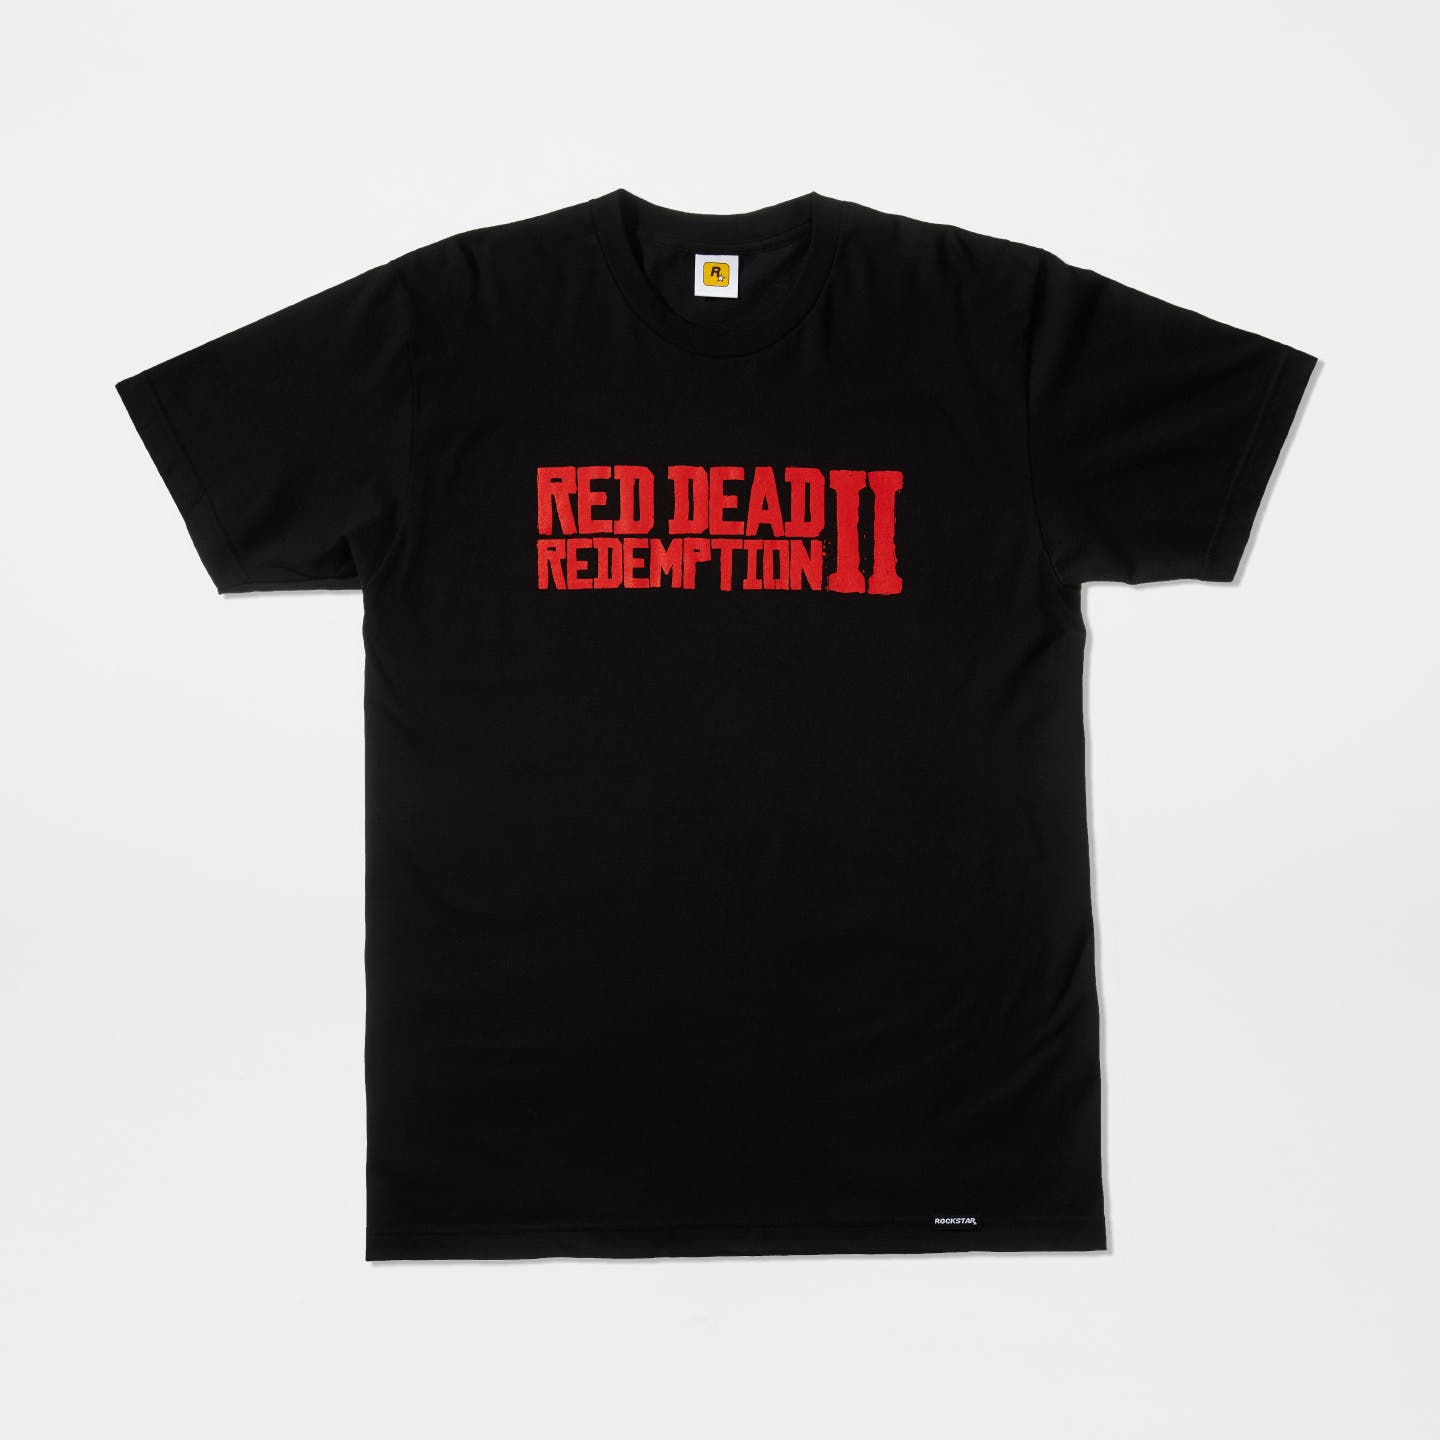 Rockstar Store, Official Store for GTA, Red Dead Redemption